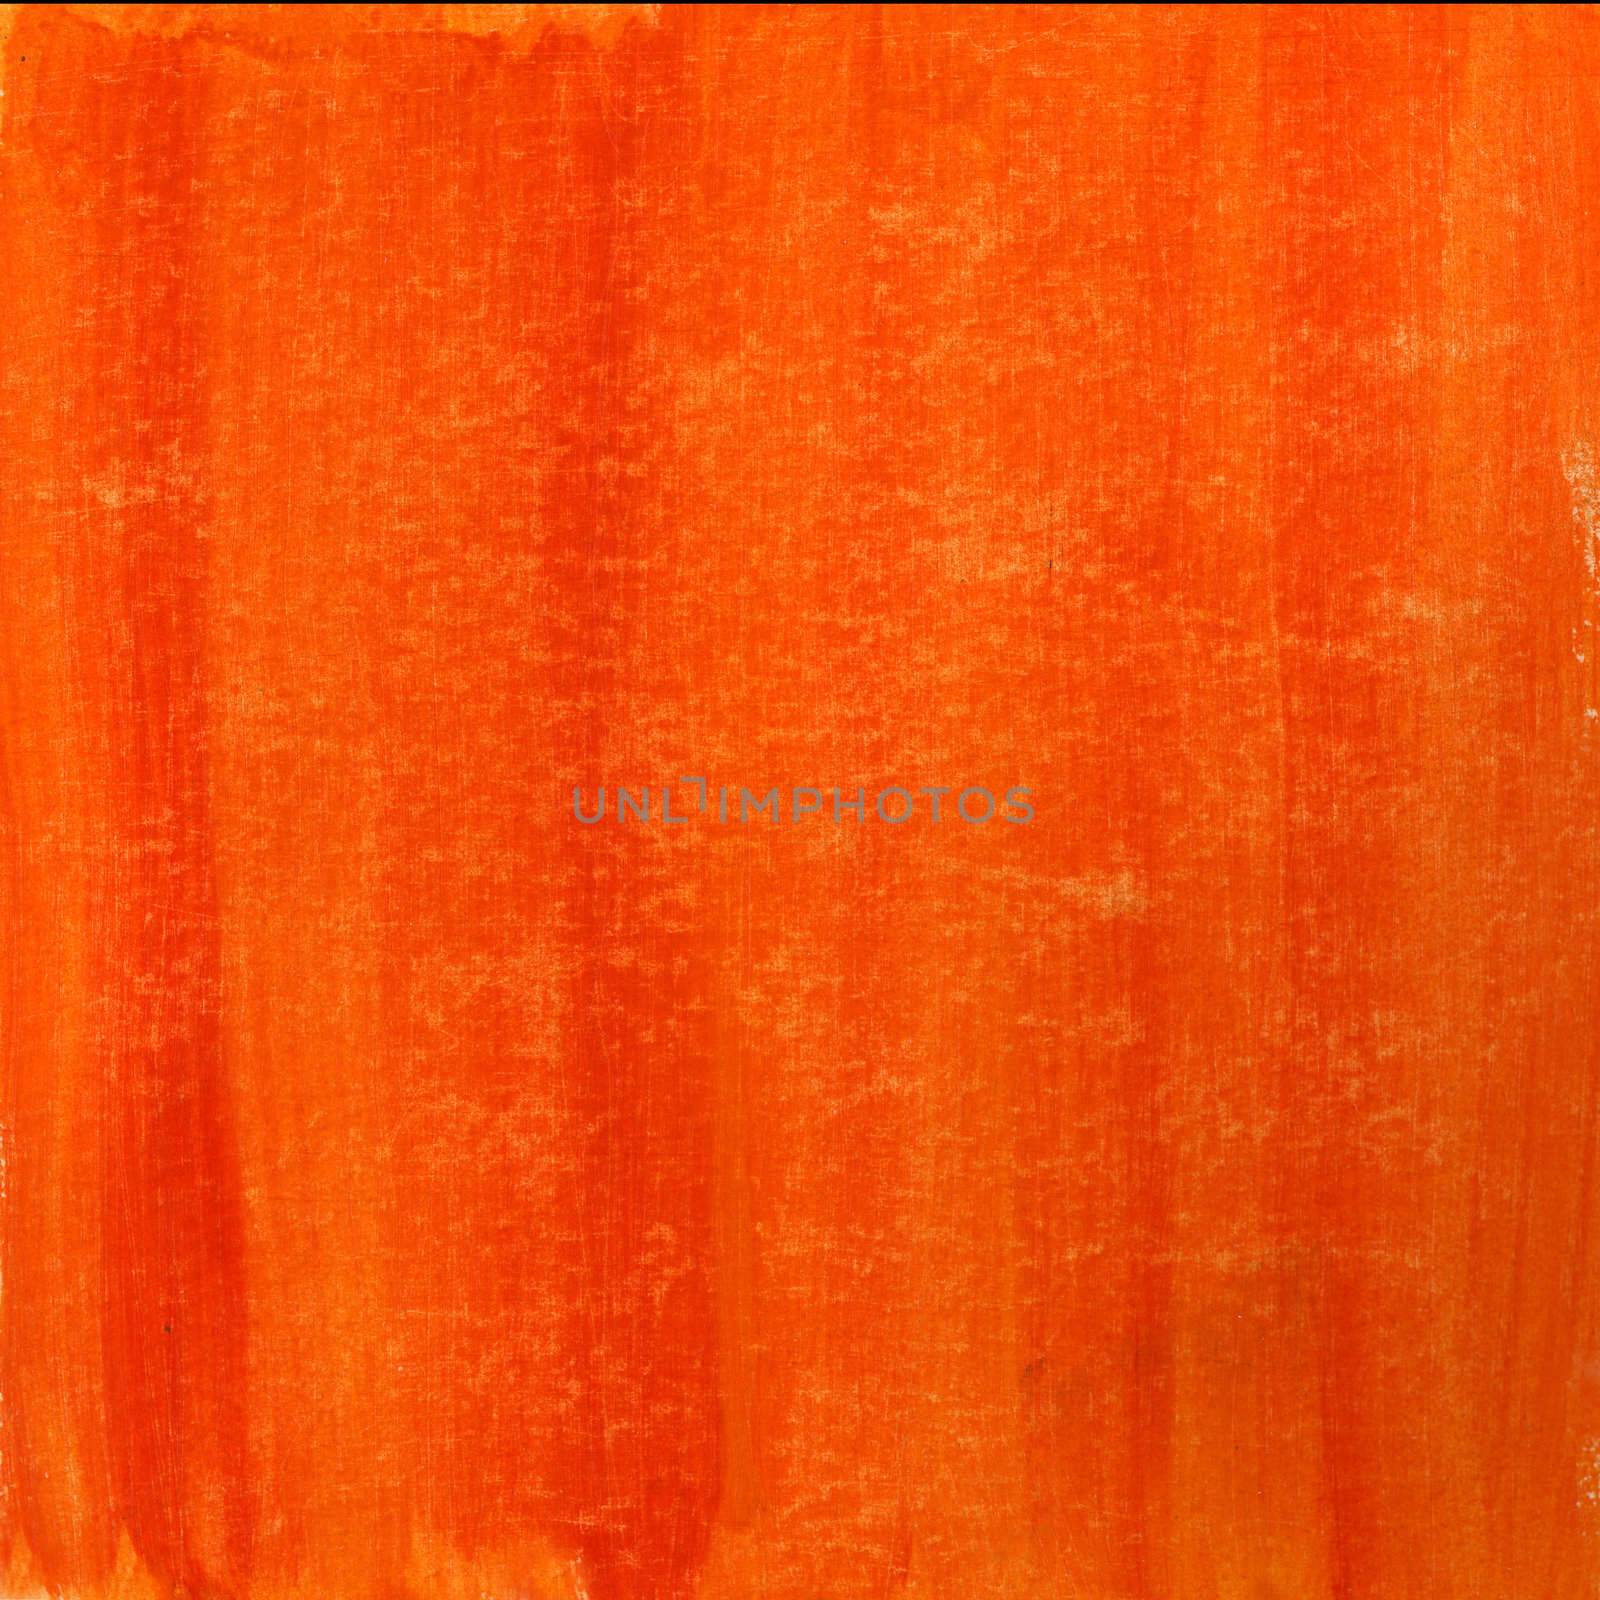 red orange hand painted watercolor abstract witch scratch texture, self made